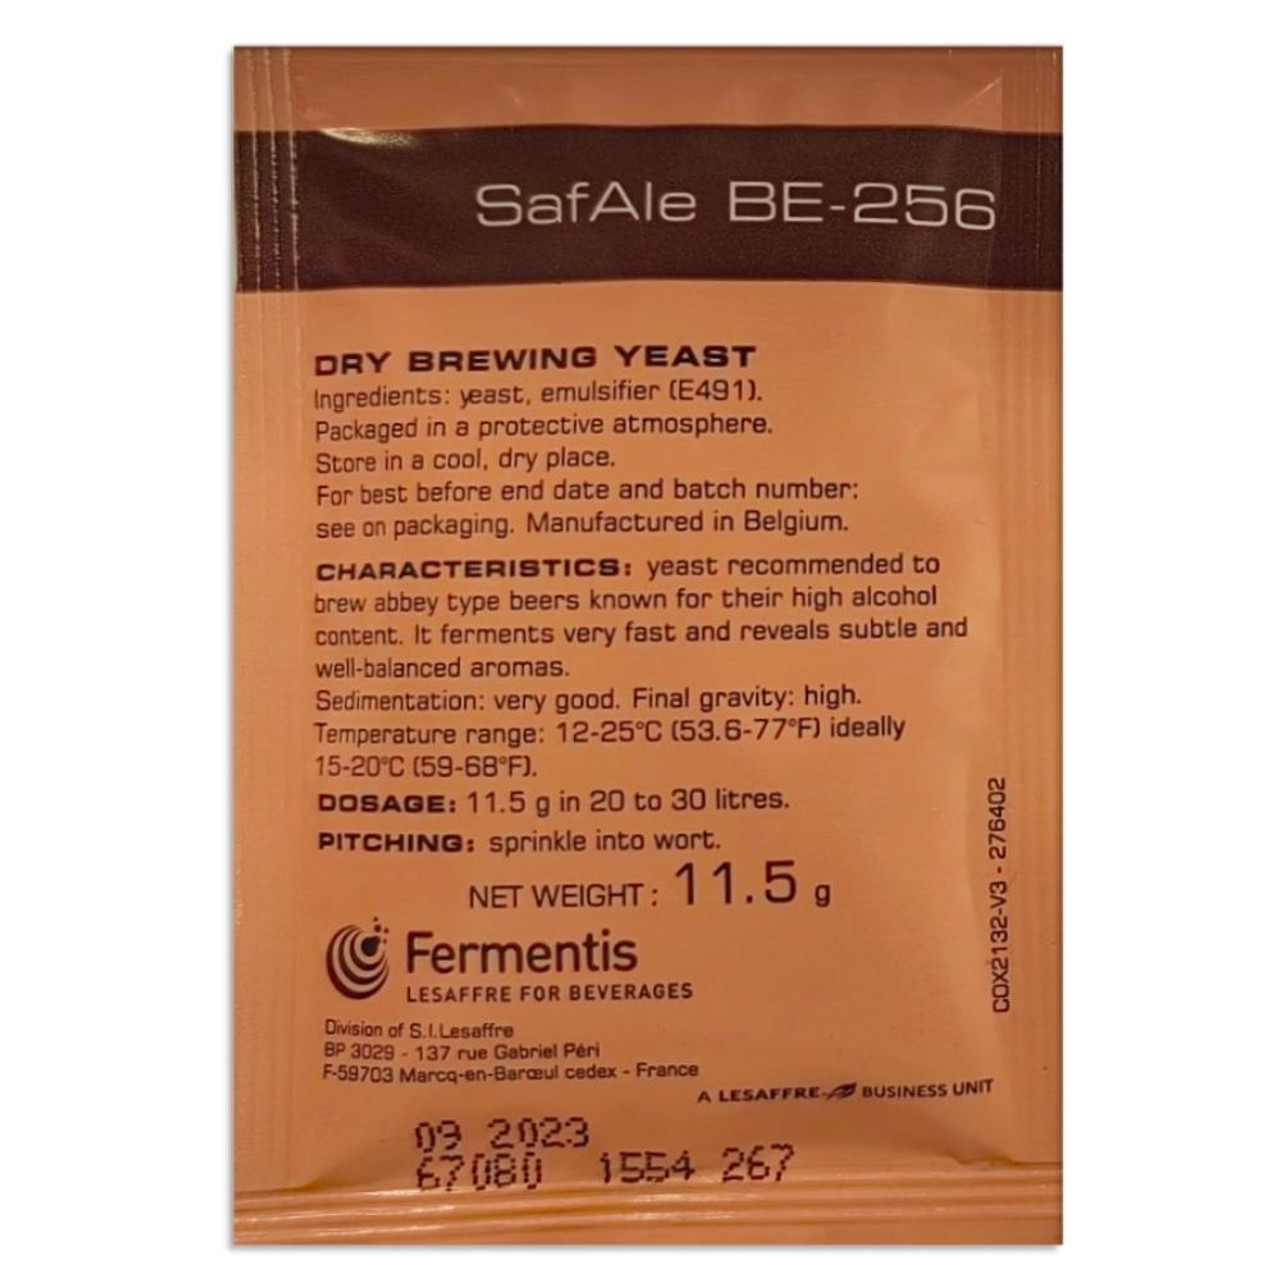 Fermentis Safale BE-256 Beer Yeast Abbey style ales 11.5g 20-30L BBE 09/2023